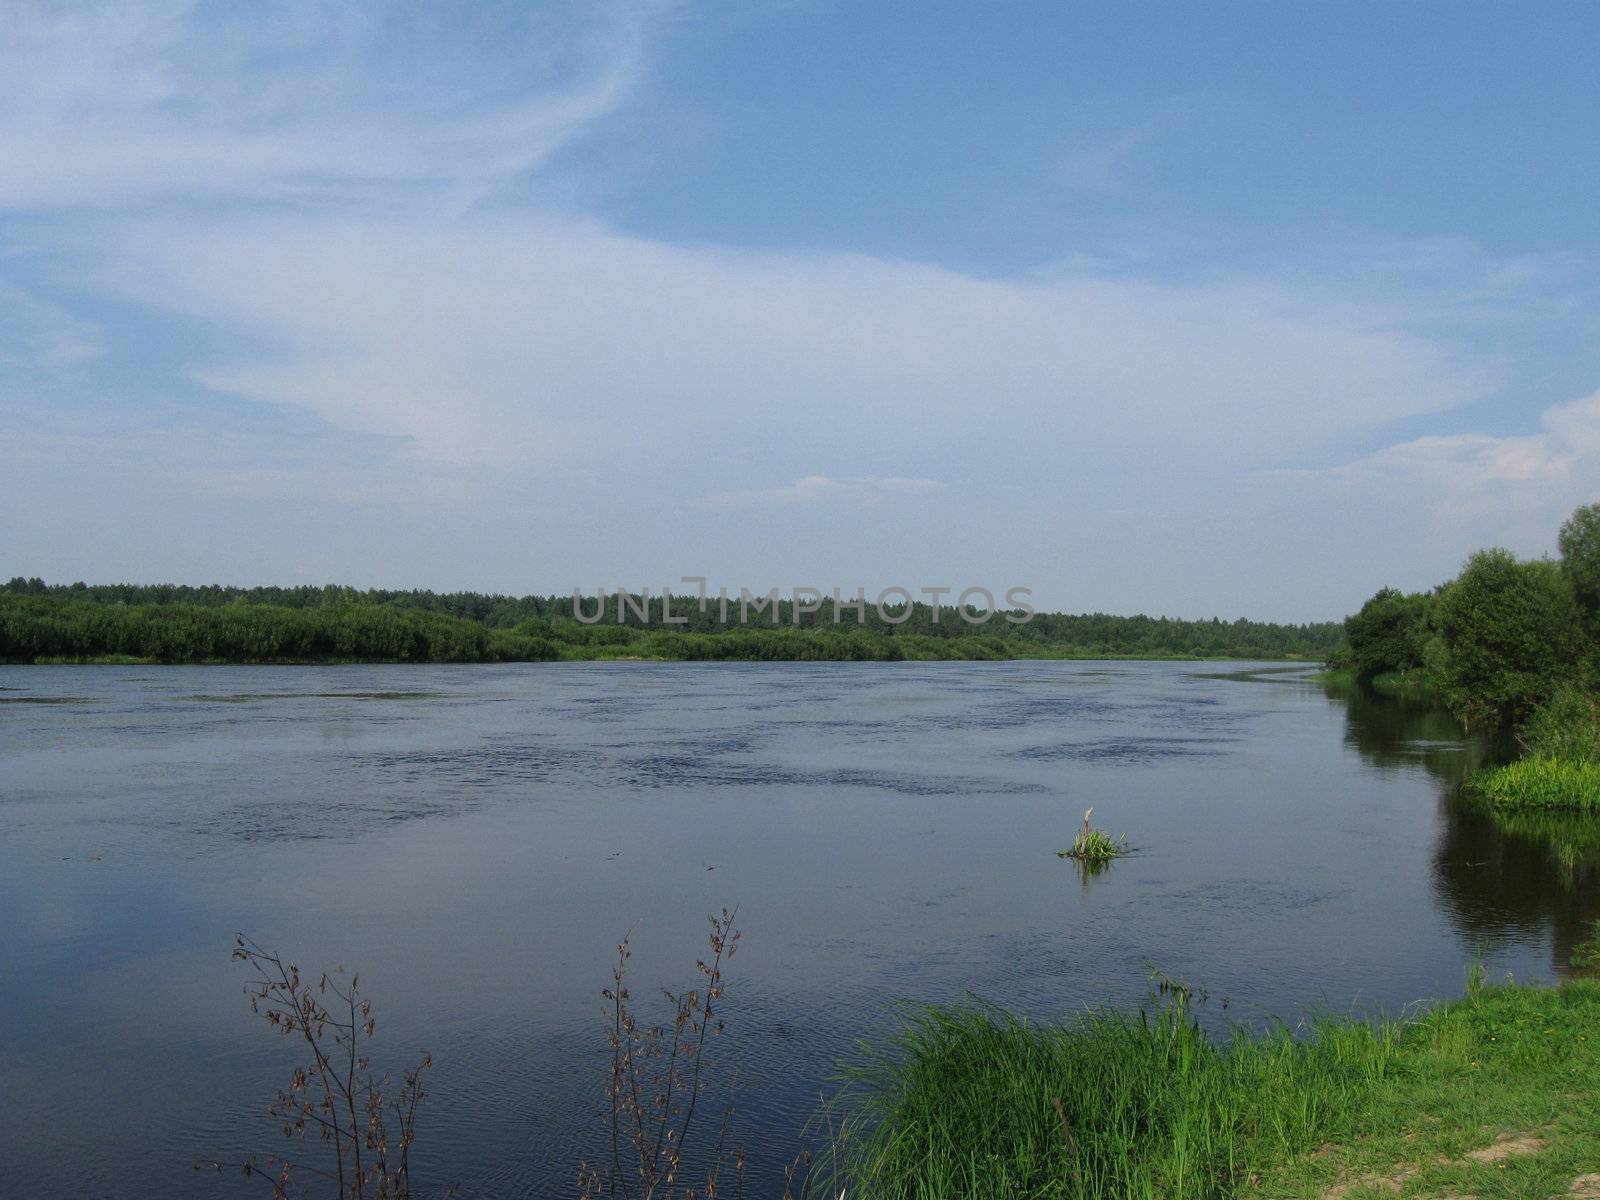 The river Berezina, suburb of a city of Bobruisk. Fine picturesque places.